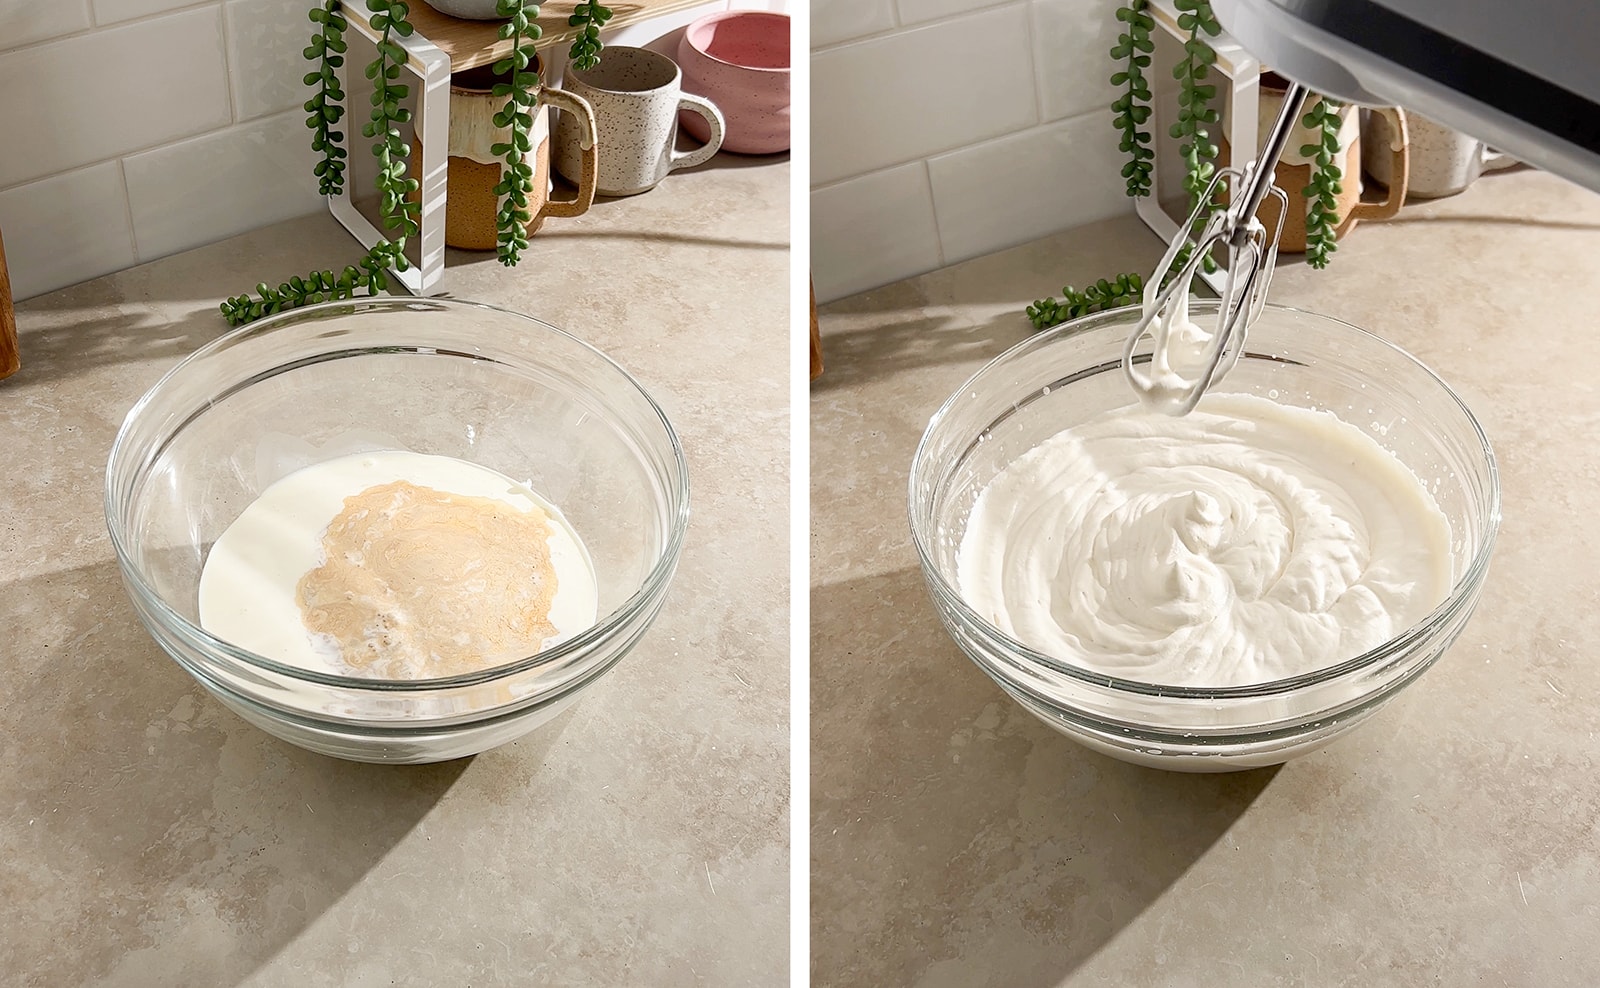 Left to right: mixing bowl full of whipping cream and vanilla, whipped cream in a bowl with hand mixer being lifted out of it.